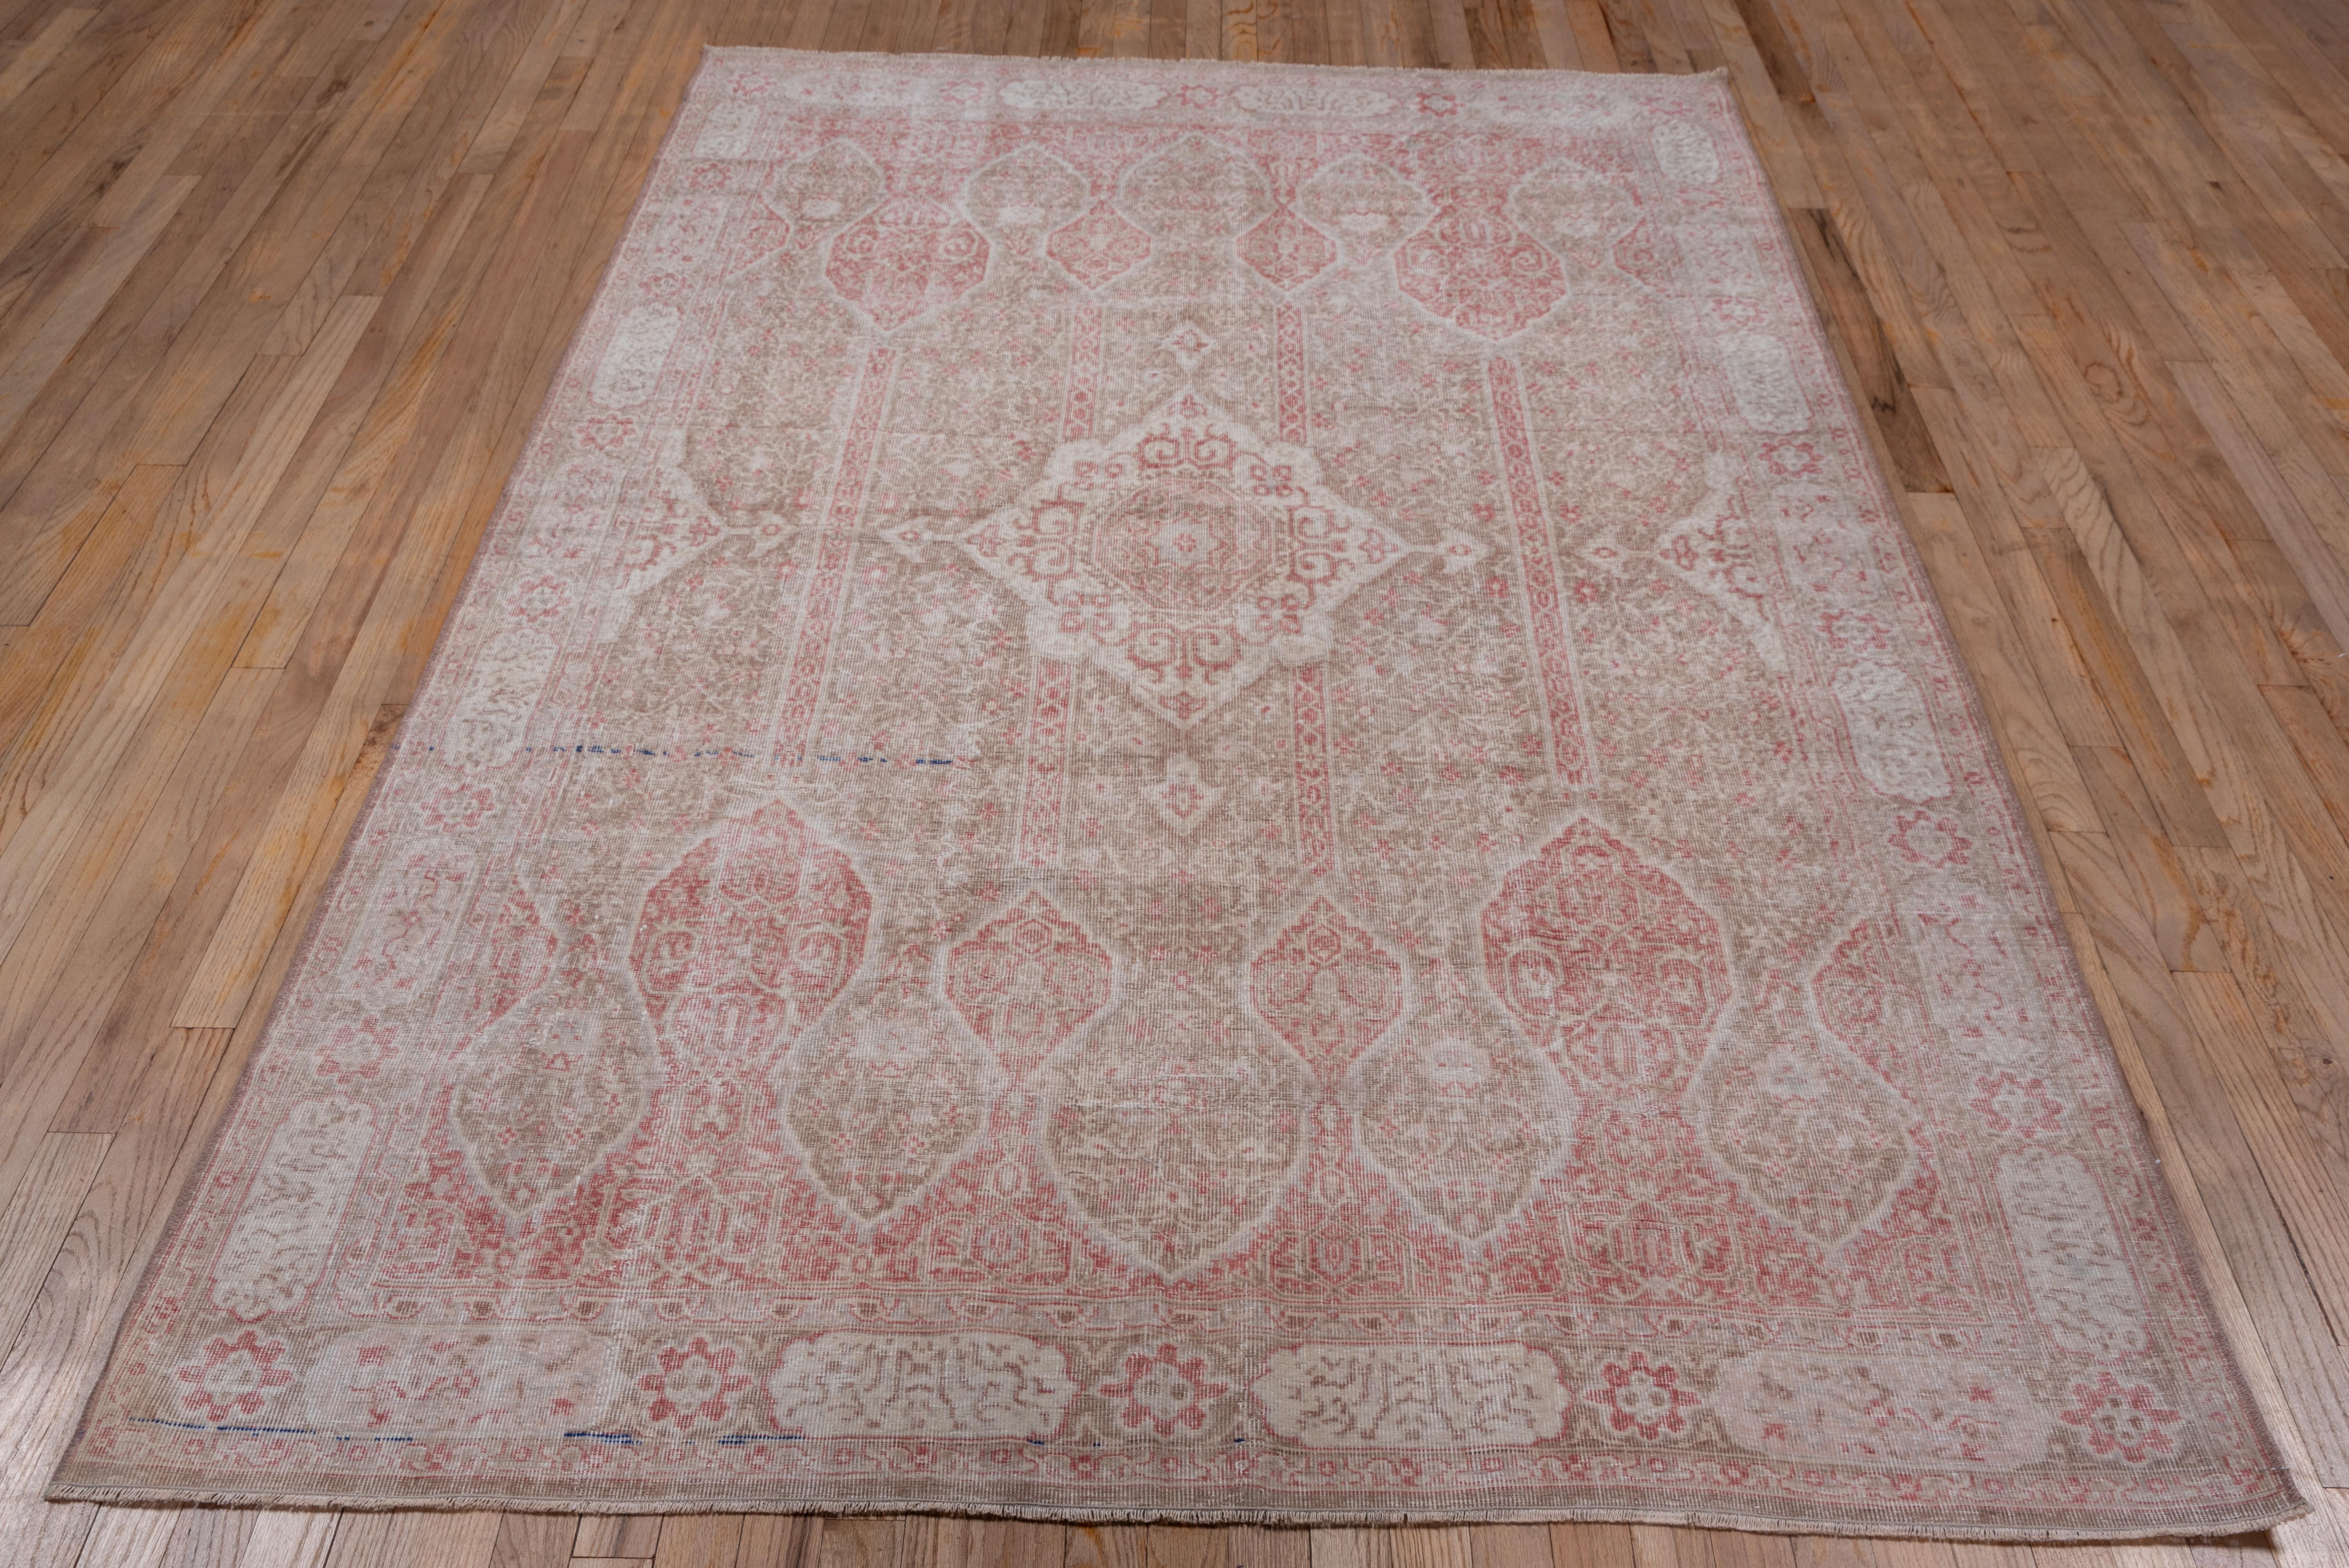 Unique Oushak Rug, Pink, Light Brown and Ivory In Good Condition For Sale In New York, NY